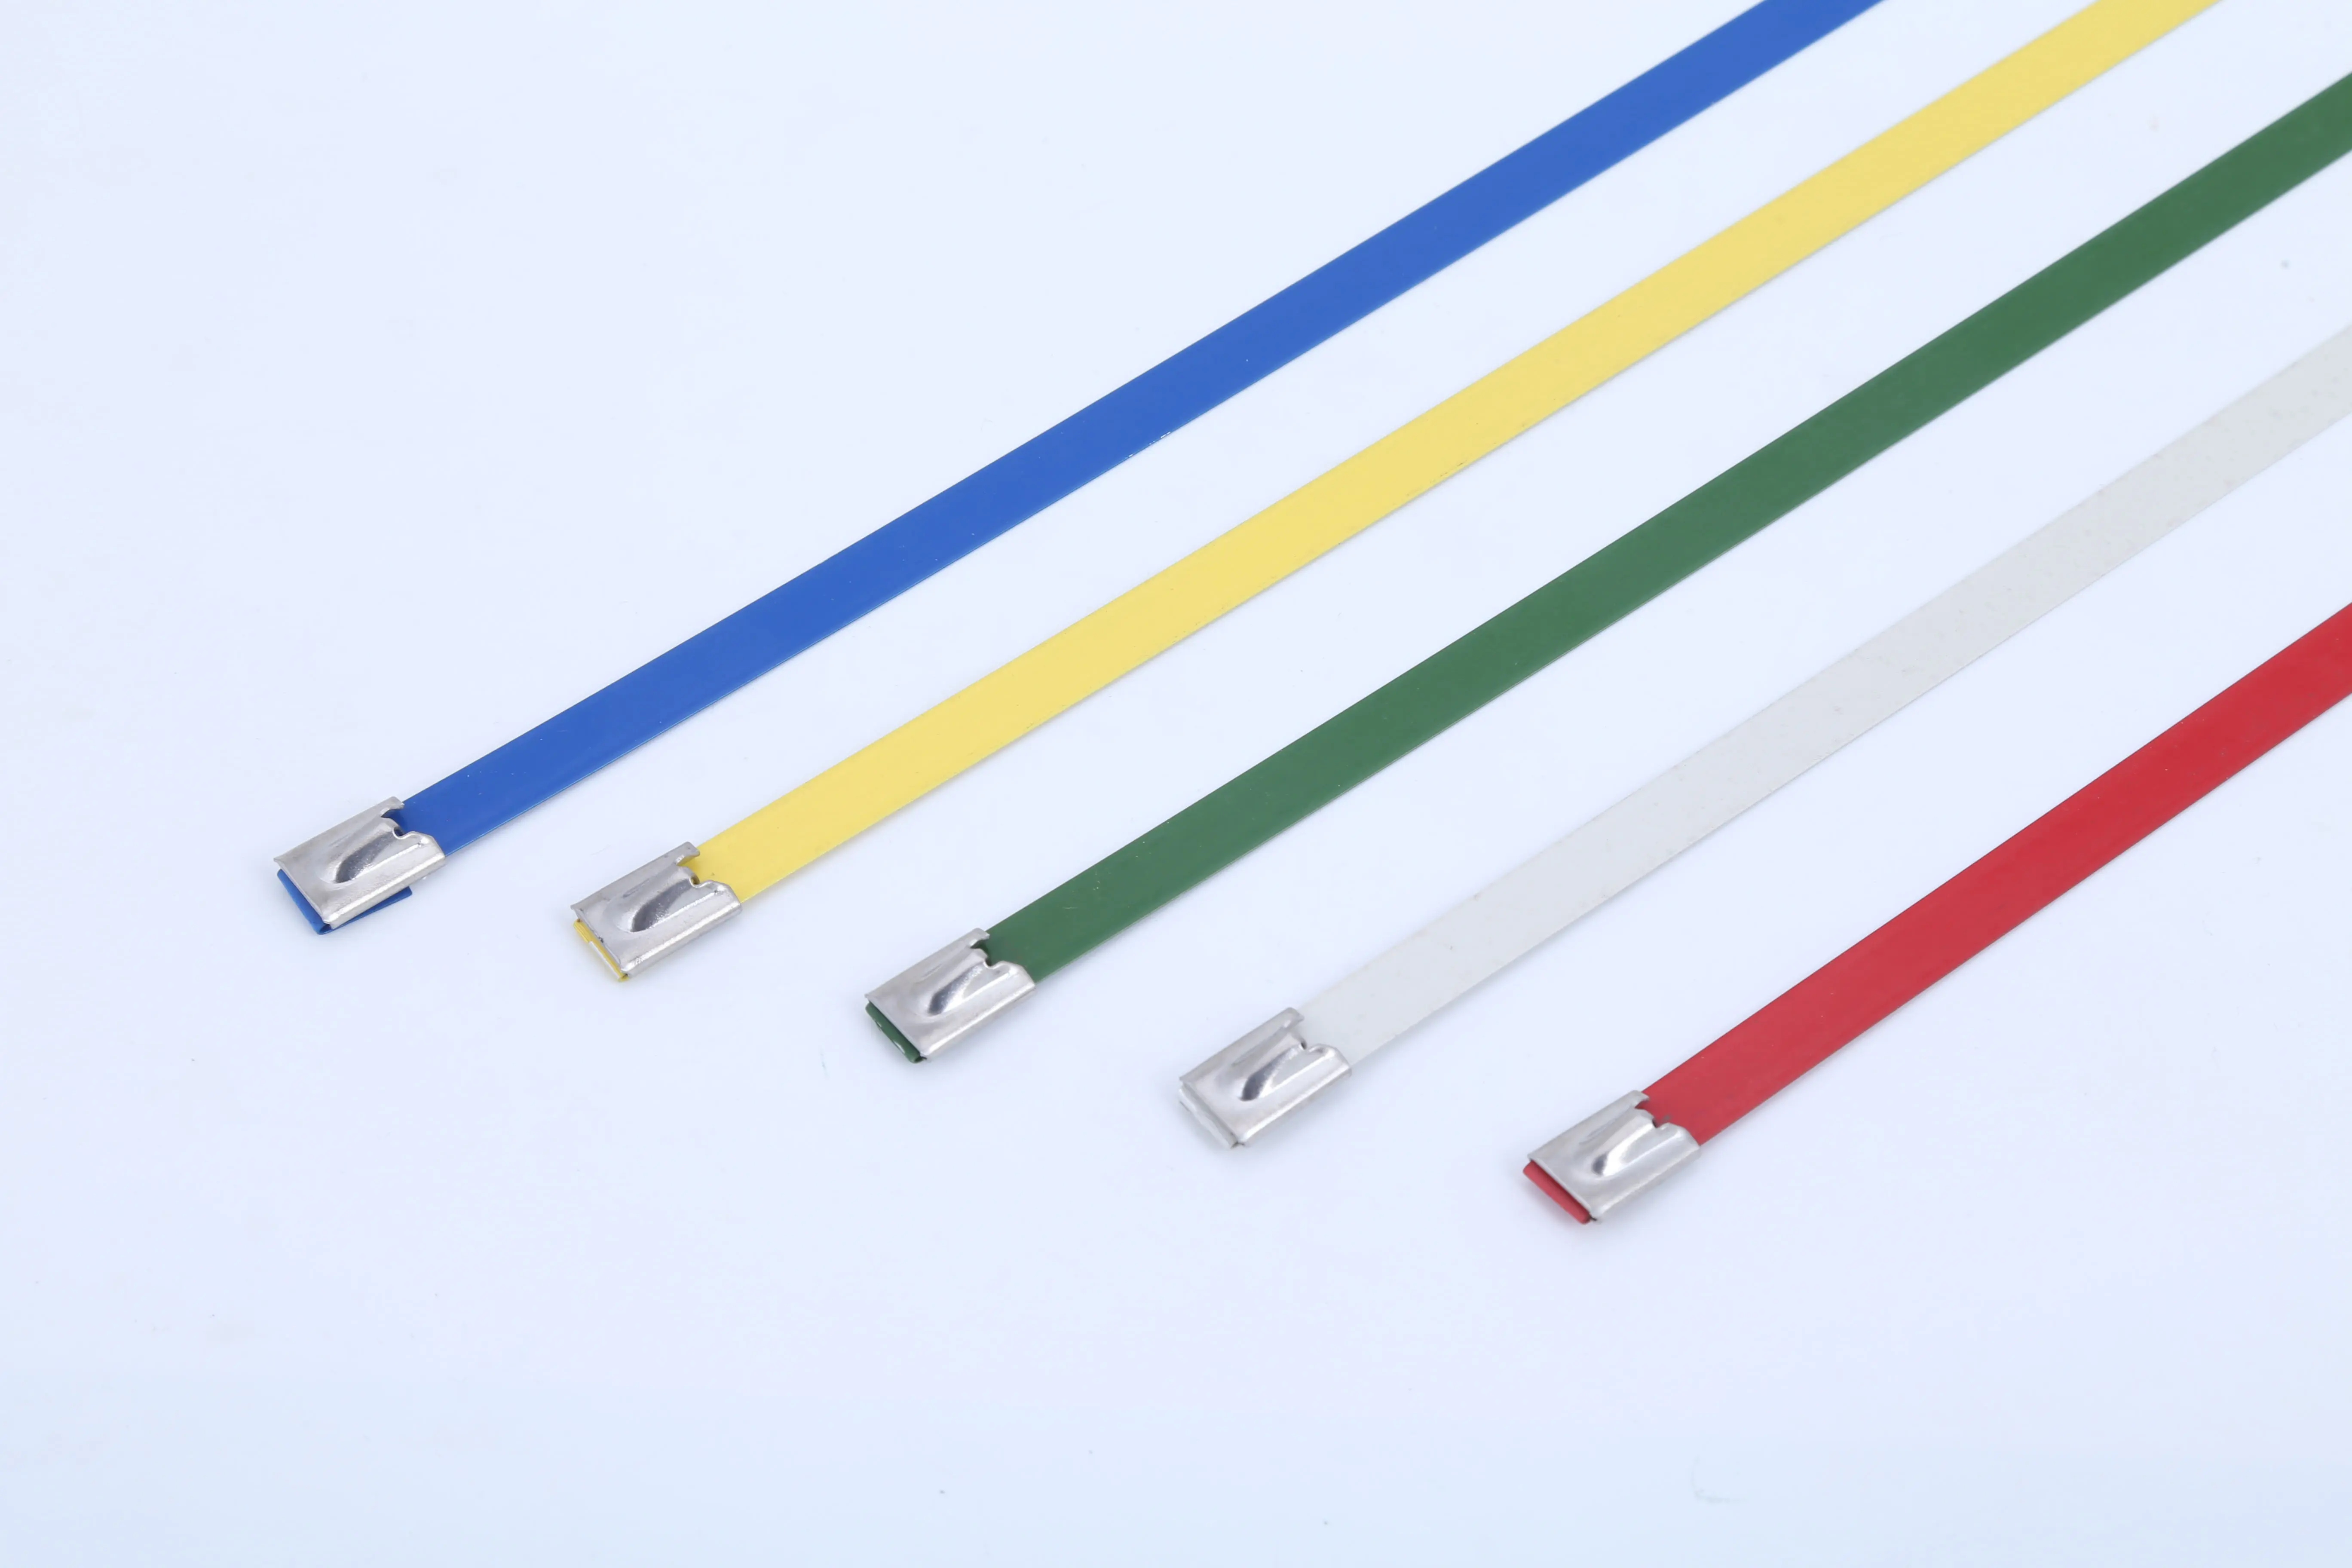 How to judge the quality of cable ties